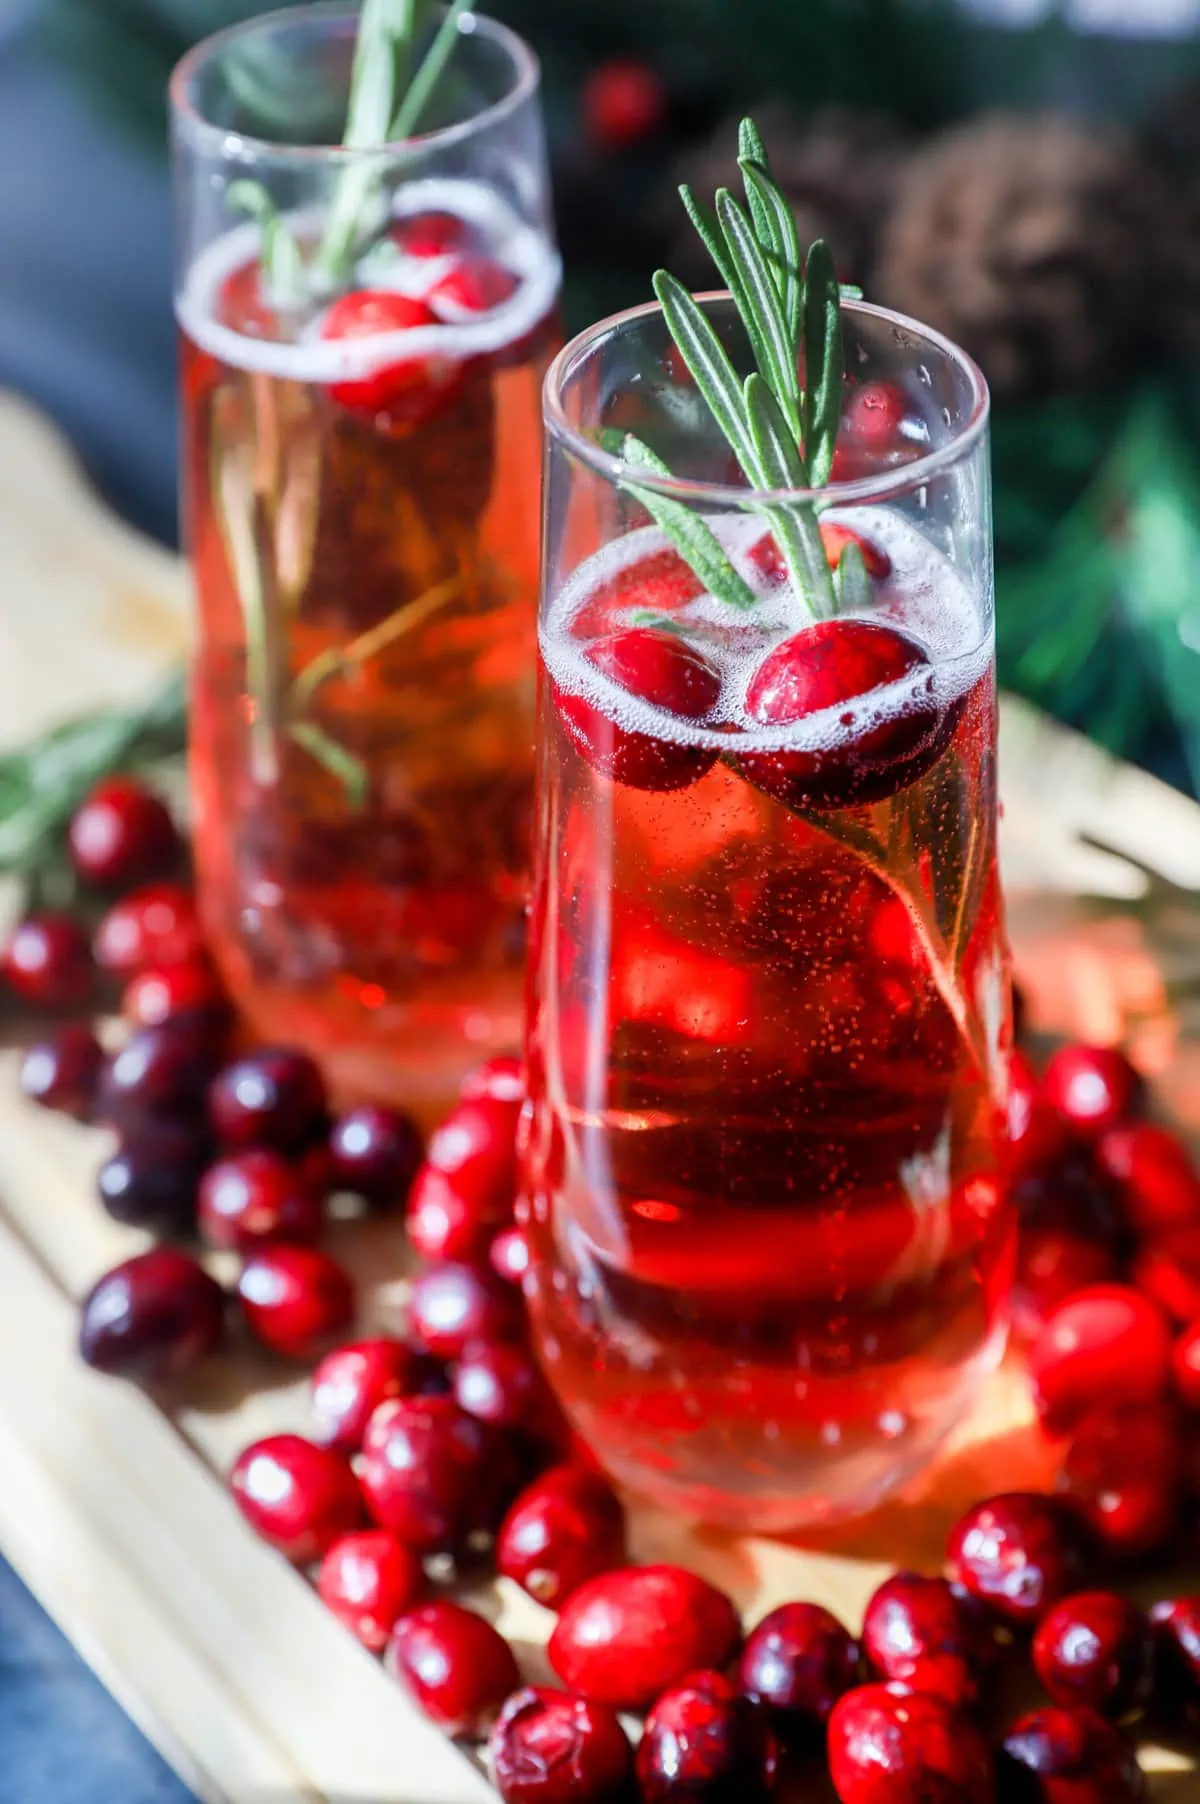 Cranberry mimosa image with champagne flutes